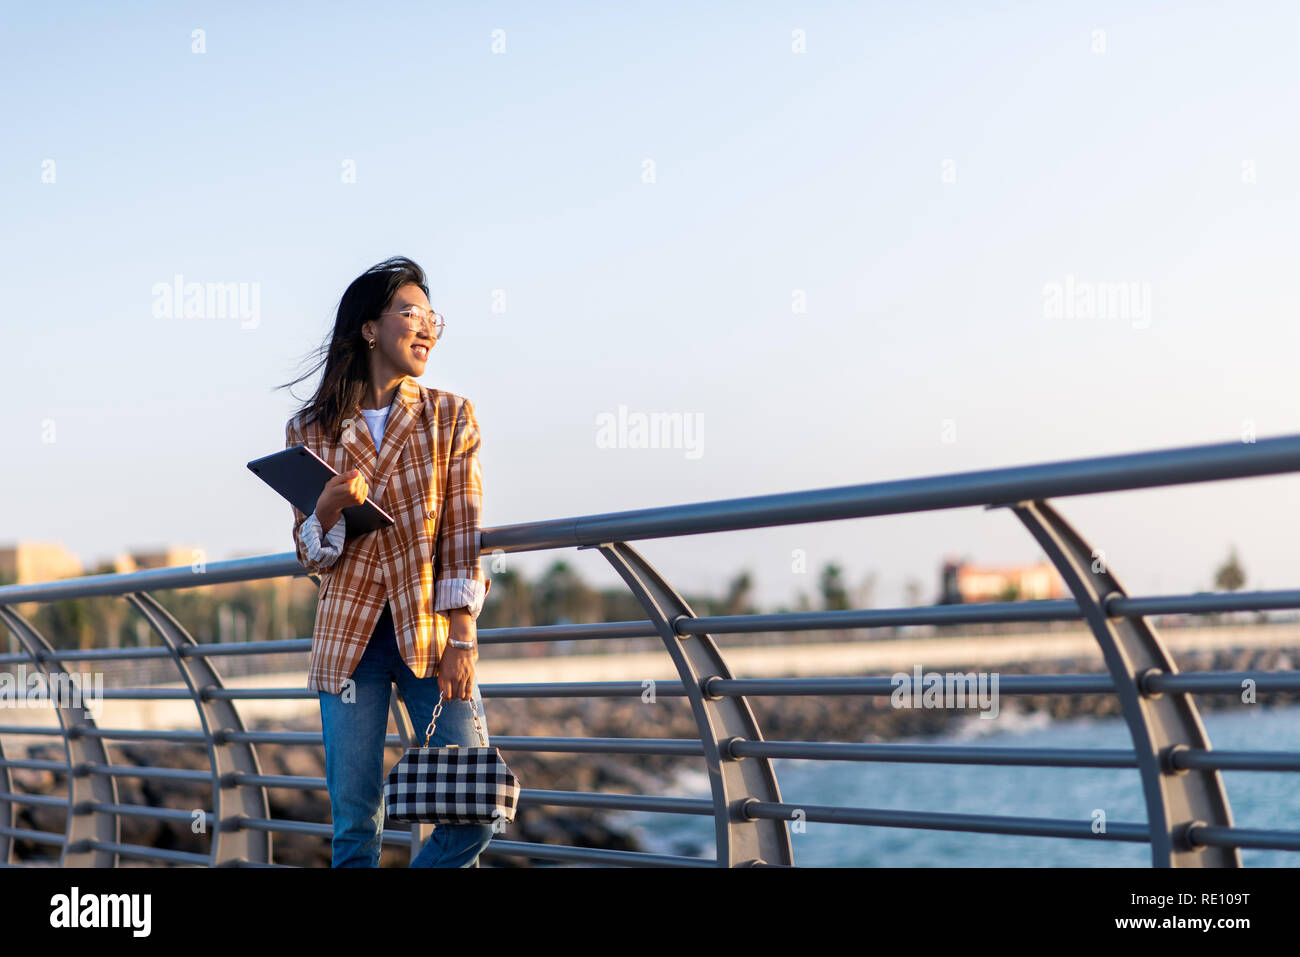 Fashionable Asian woman with laptop outdoors portrait Stock Photo